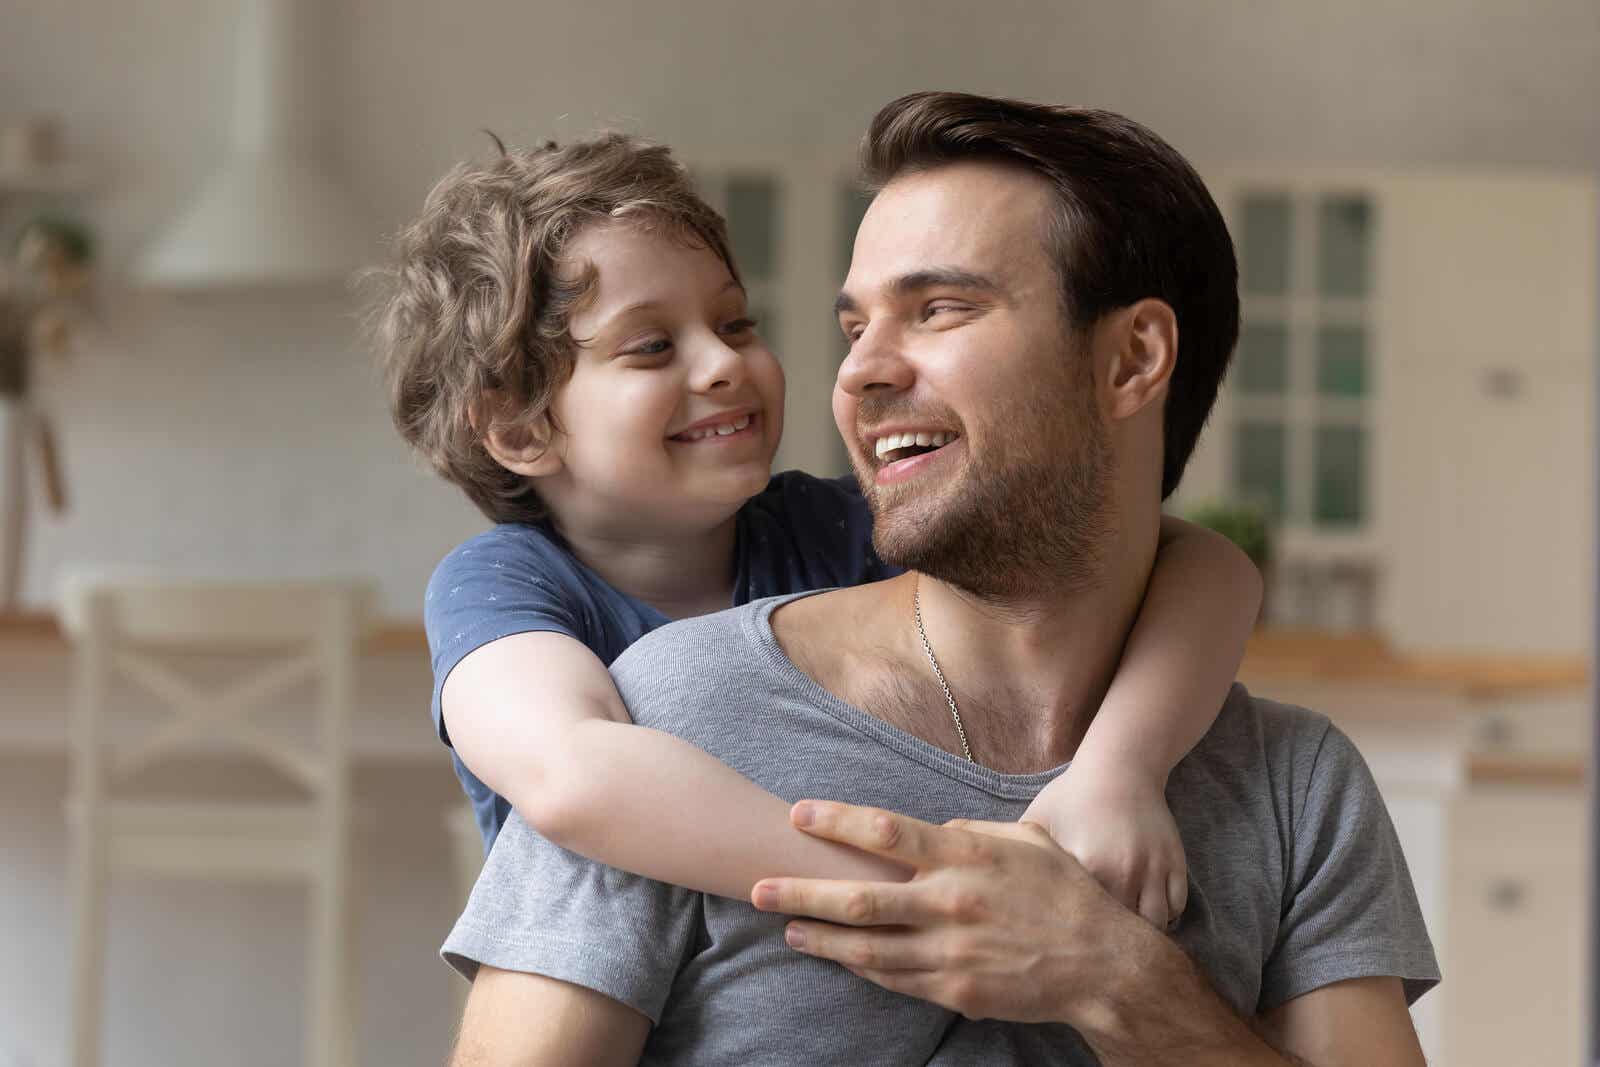 A child with his arms around his father's shoulders as they smile at one another.